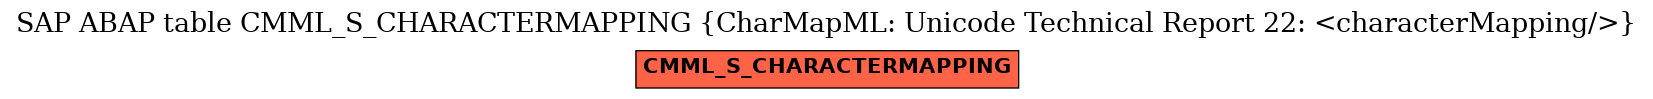 E-R Diagram for table CMML_S_CHARACTERMAPPING (CharMapML: Unicode Technical Report 22: <characterMapping/>)